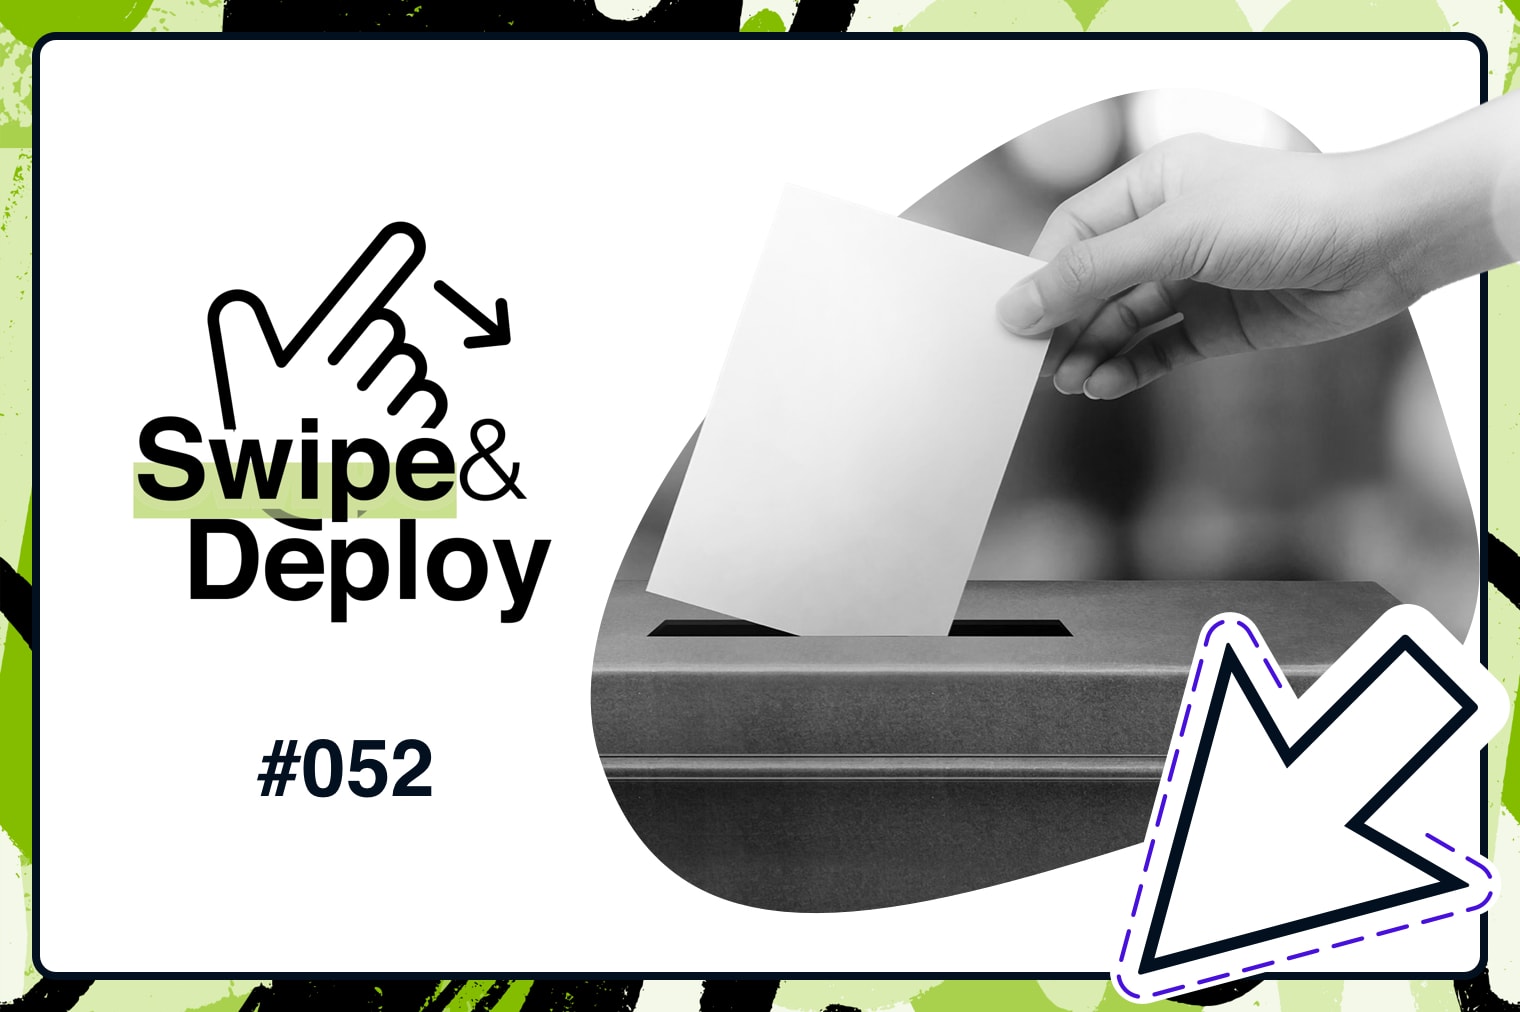 Swipe & Deploy 52 blog hero image of a person submitting a vote.